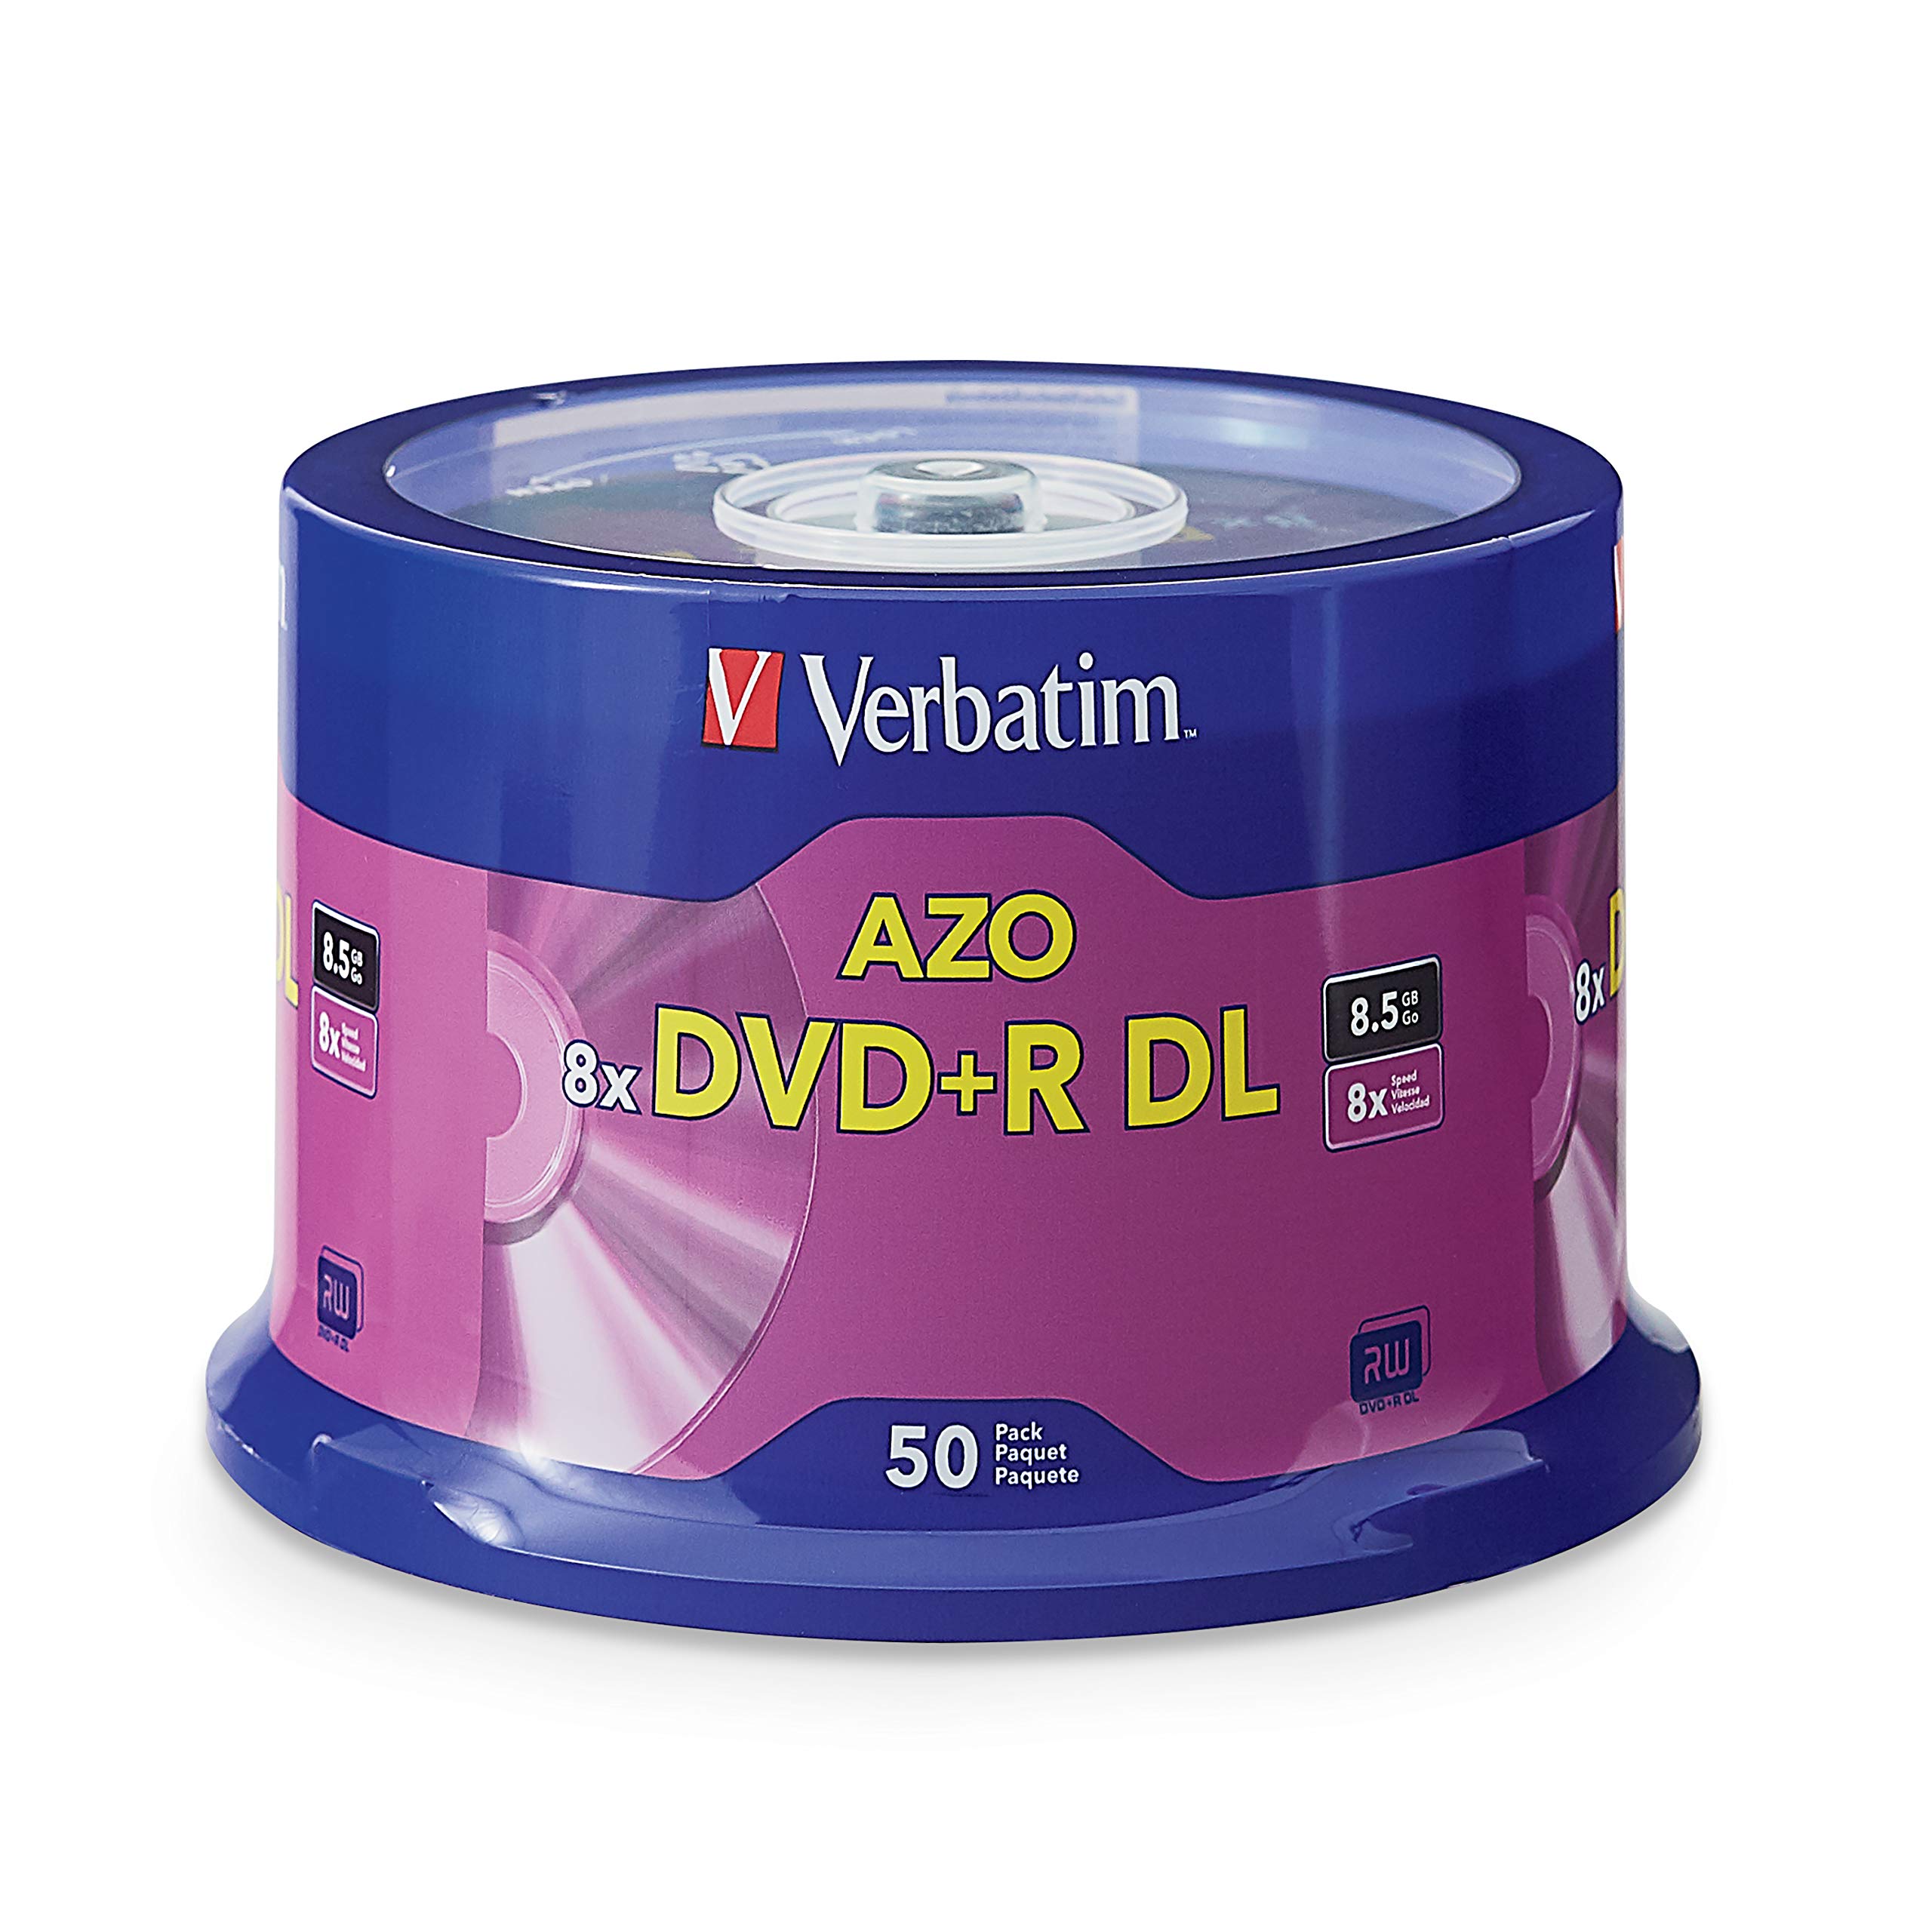 Verbatim DVD+R DL 8.5GB 8X with Branded Surface - 50pk Spindle, 50 - Disc